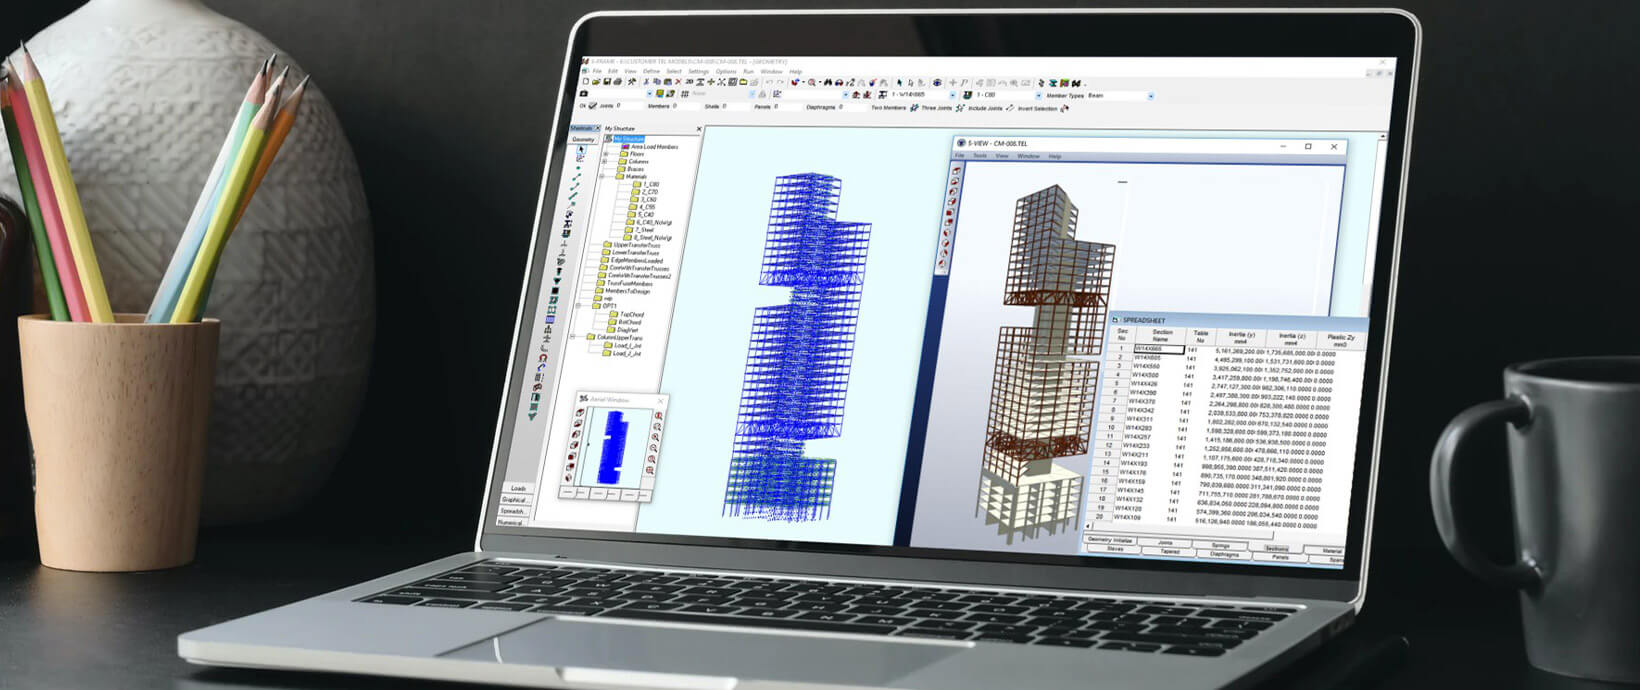 Altair Acquires S-FRAME Software, Powerful Structural Analysis and Design Software, to Strengthen and Accelerate Global Footprint in Architecture, Engineering, and Construction (AEC)